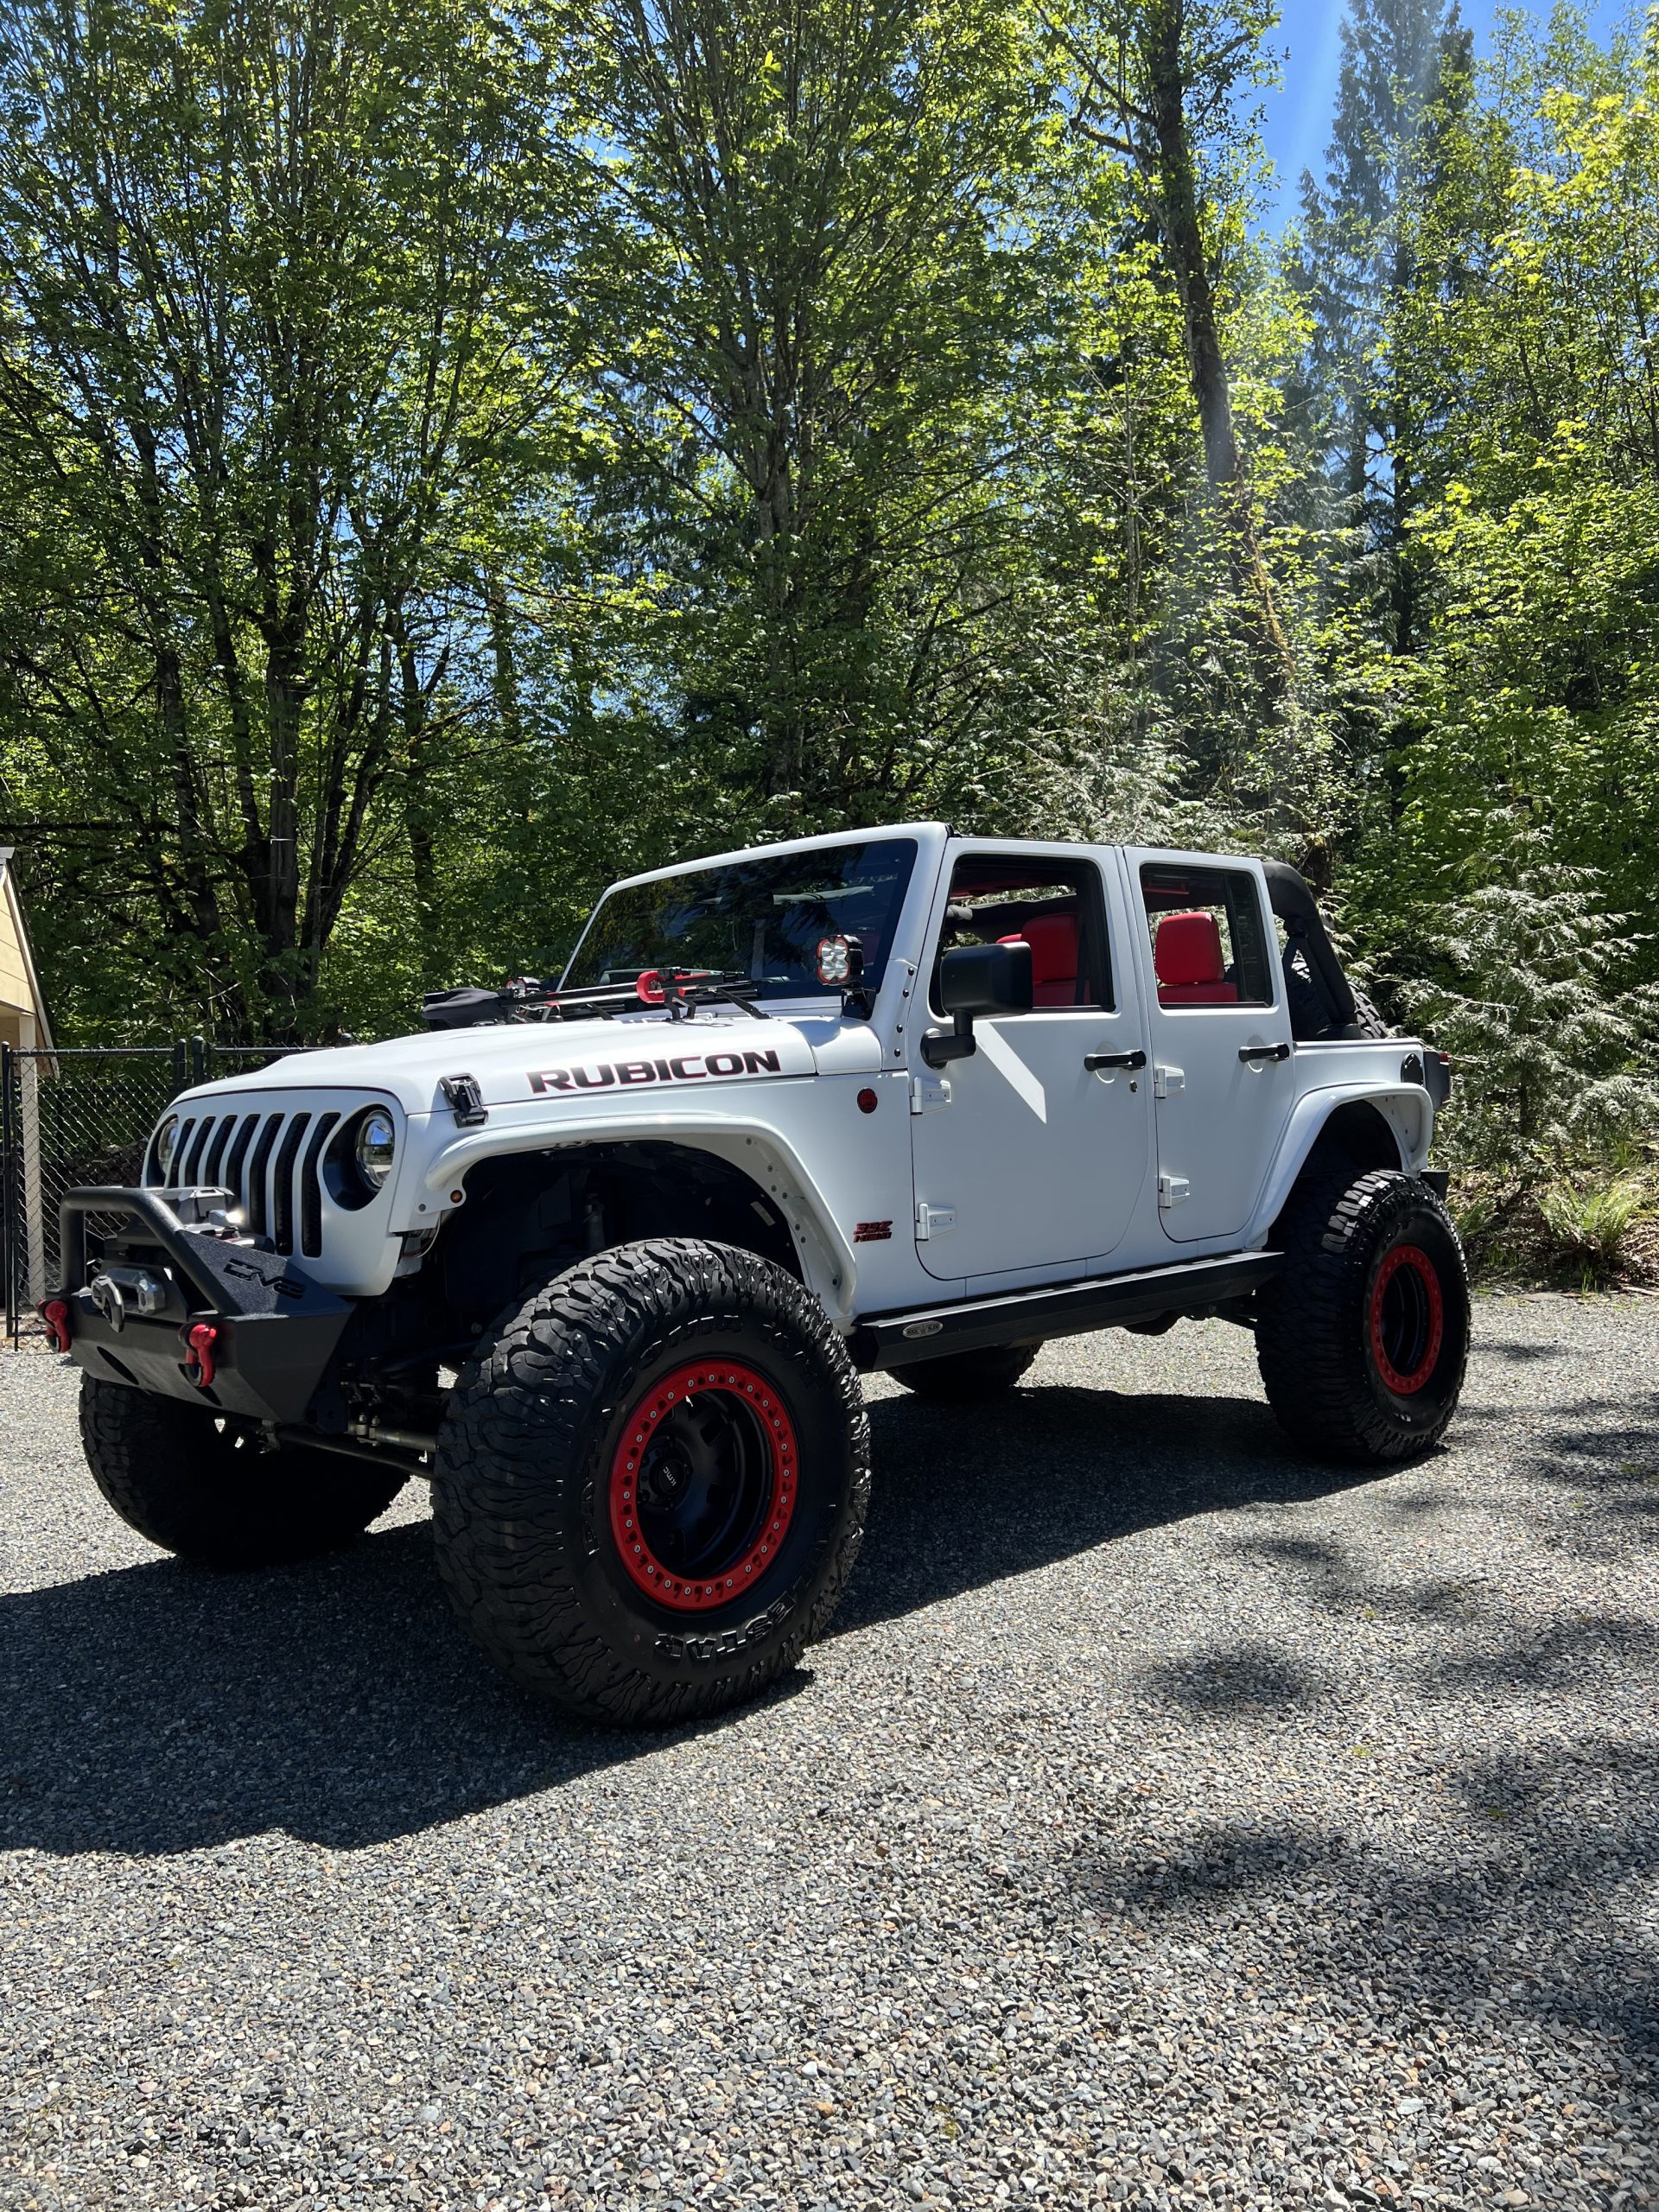 2018 Jeep Wrangler Rubicon 392 Hemi AEV, white on red, MUST SEE!!!